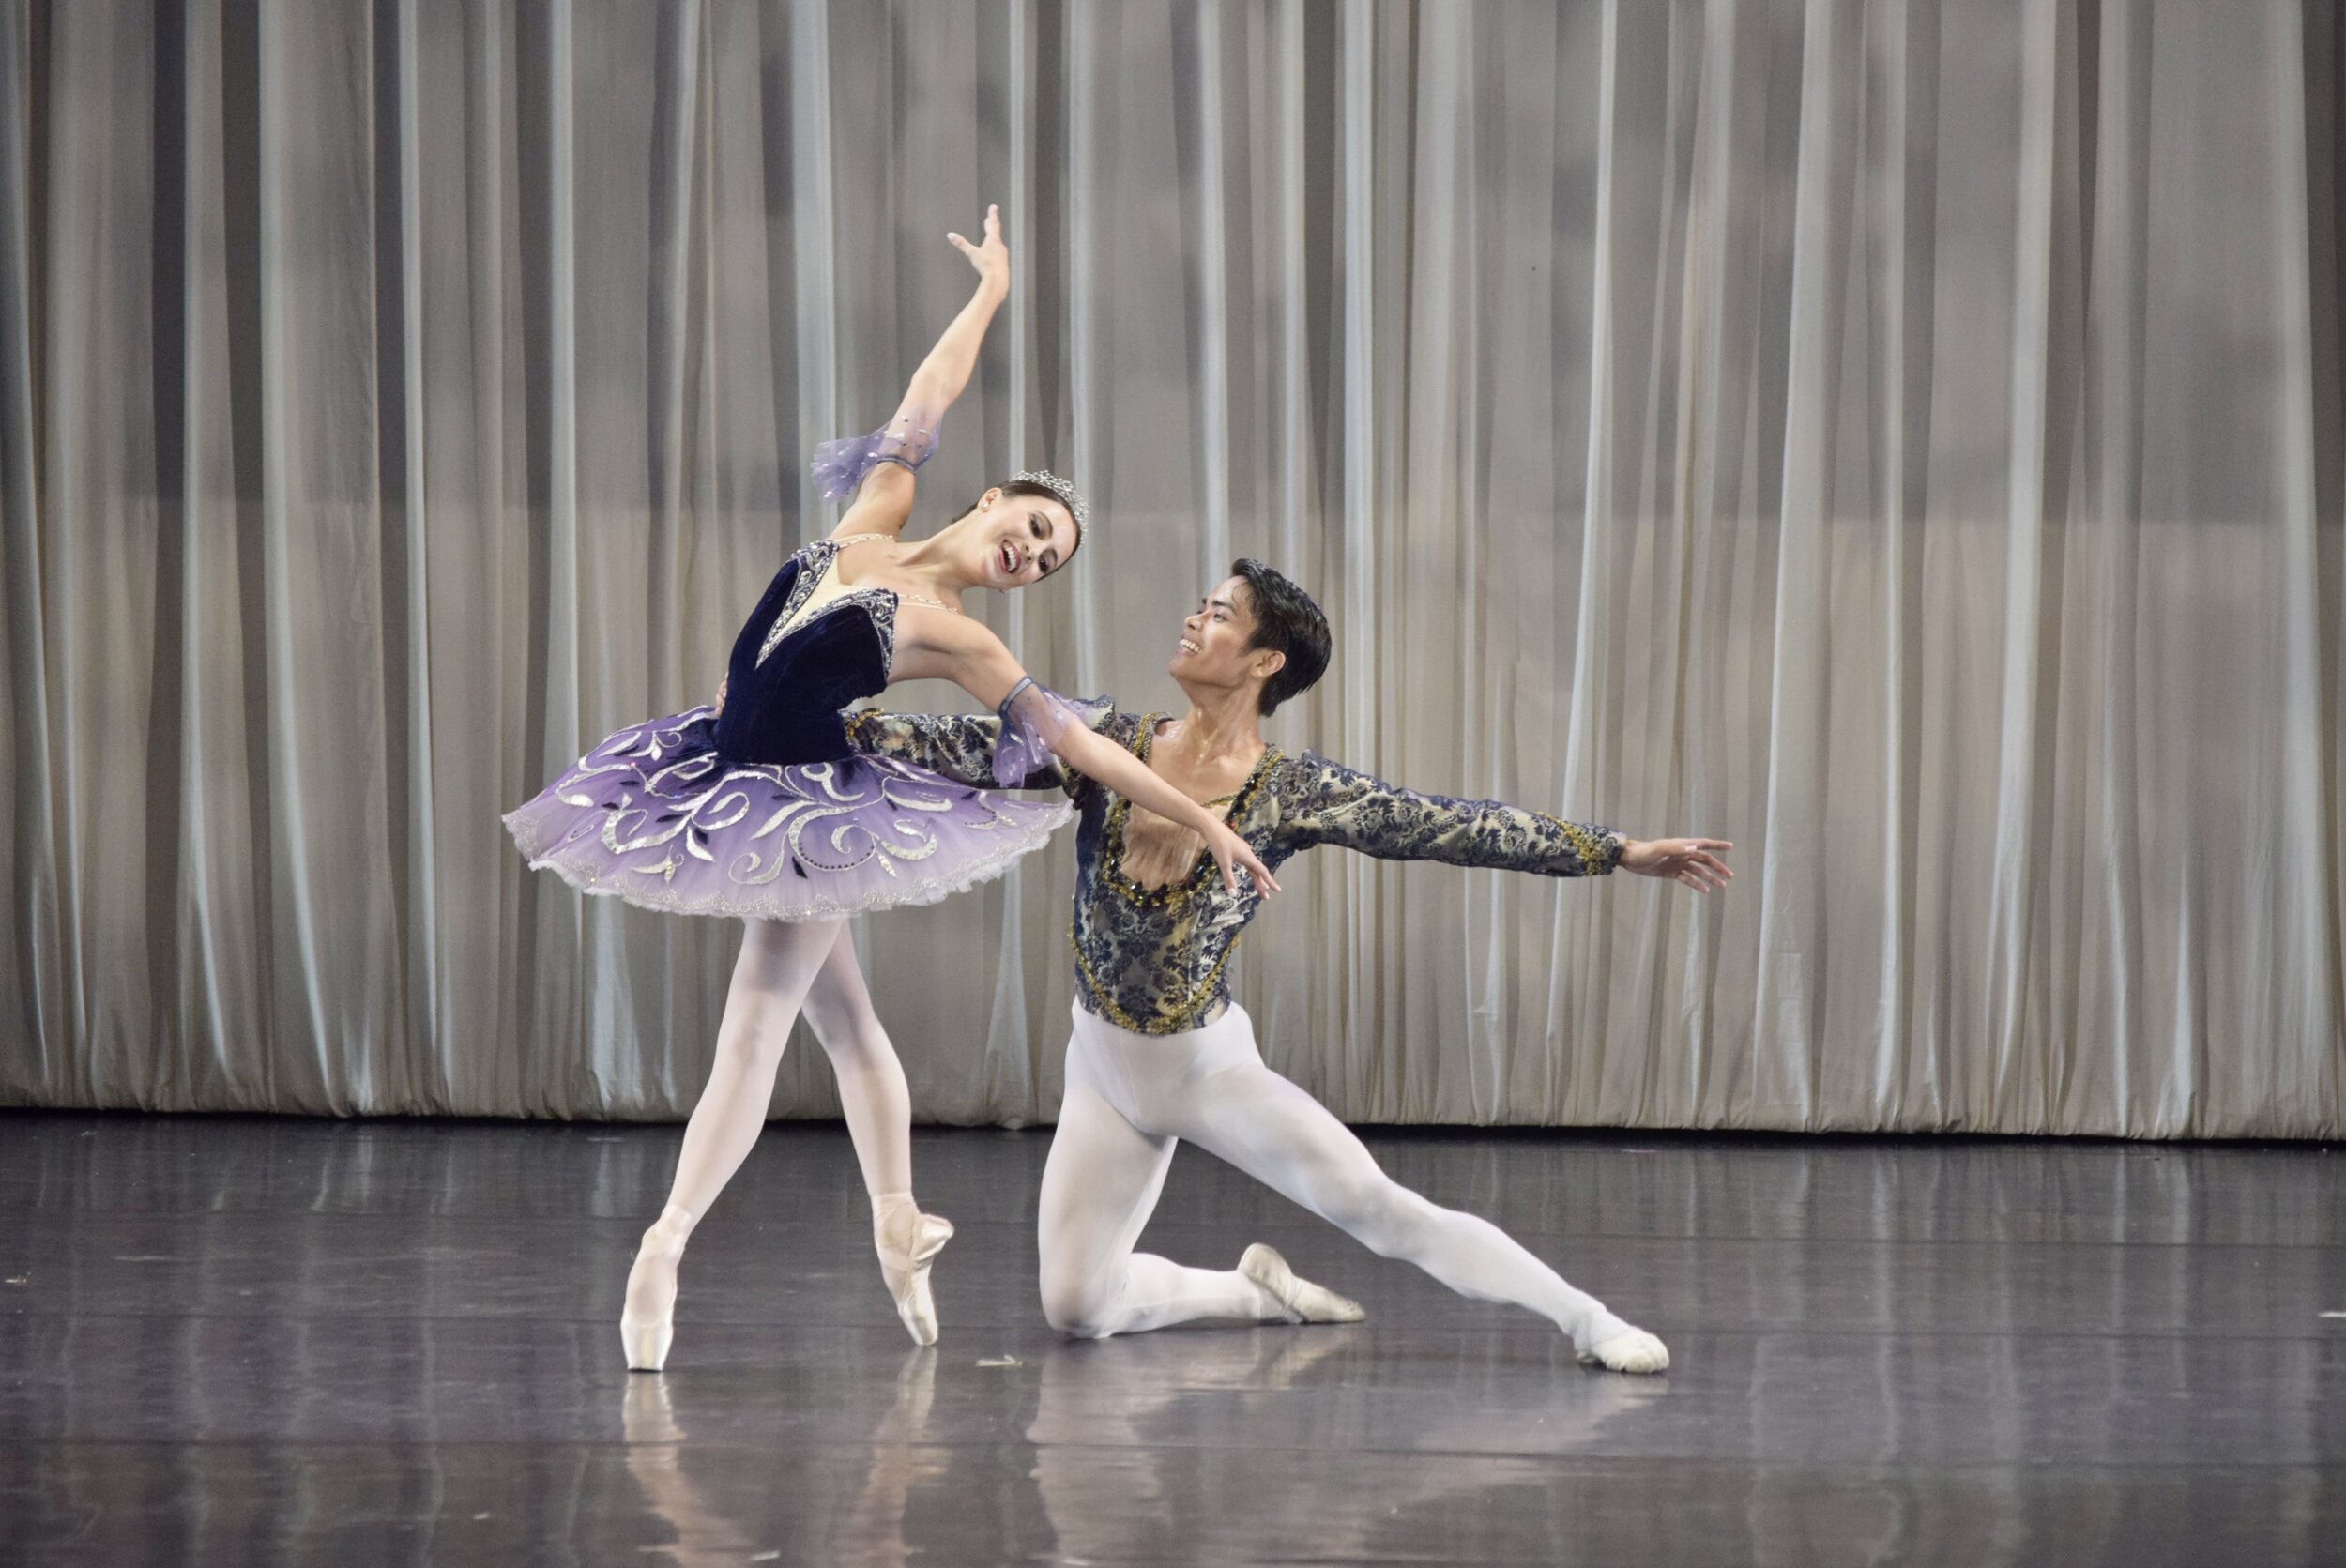    The Washington Ballet’s Katherine Barkman guests in the fundraiser  Tuloy ang Sayawan  (2019) wearing her purple lucky charm of a tutu. The former Ballet Manila principal artist danced her way to two silvers at the USA International Ballet Competi